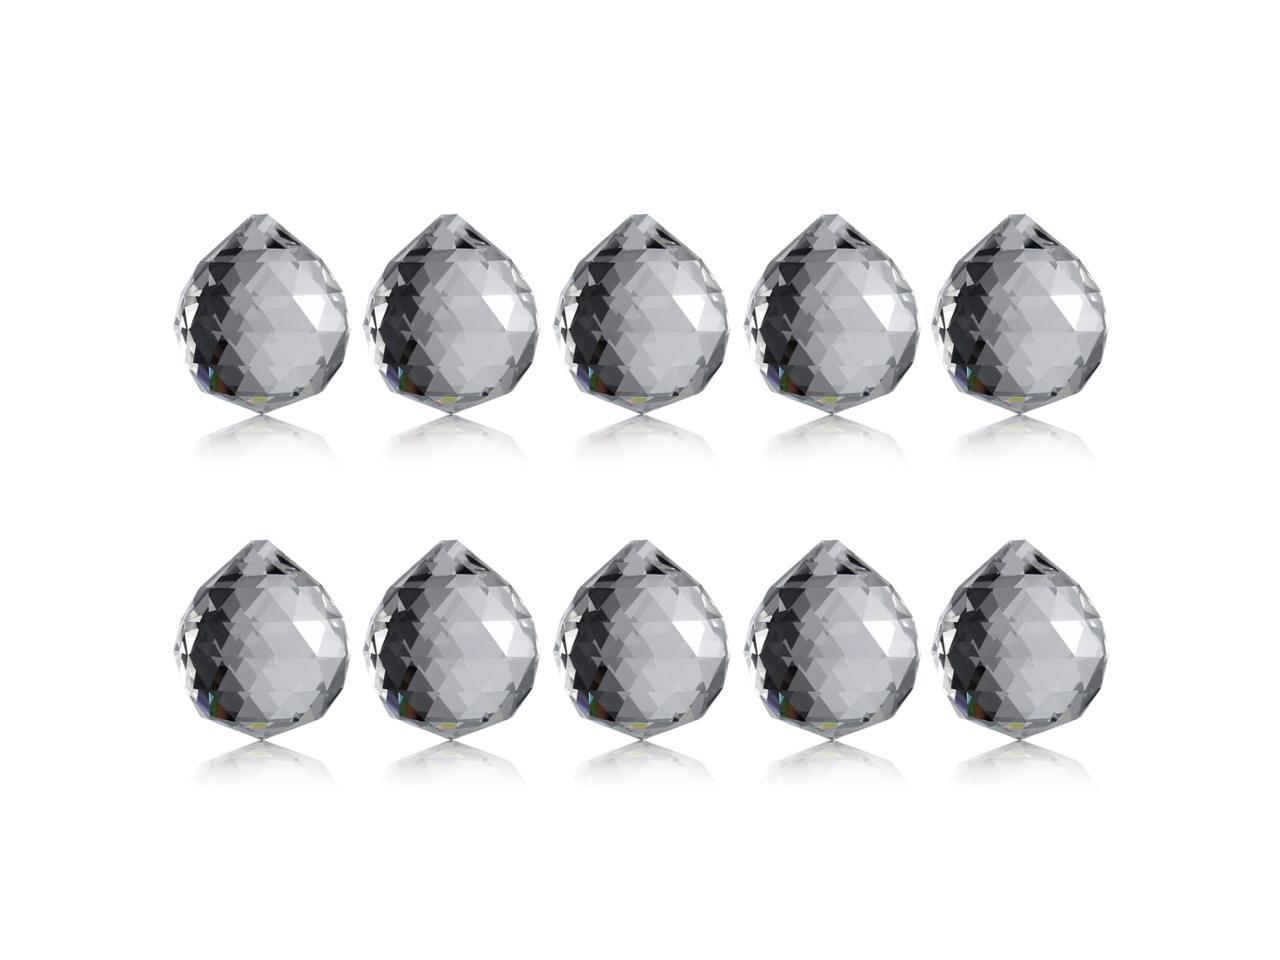 Neewer 1.75 inch Clear Crystal Ball Prism Pendant Suncatcher 40m 10-Pack 